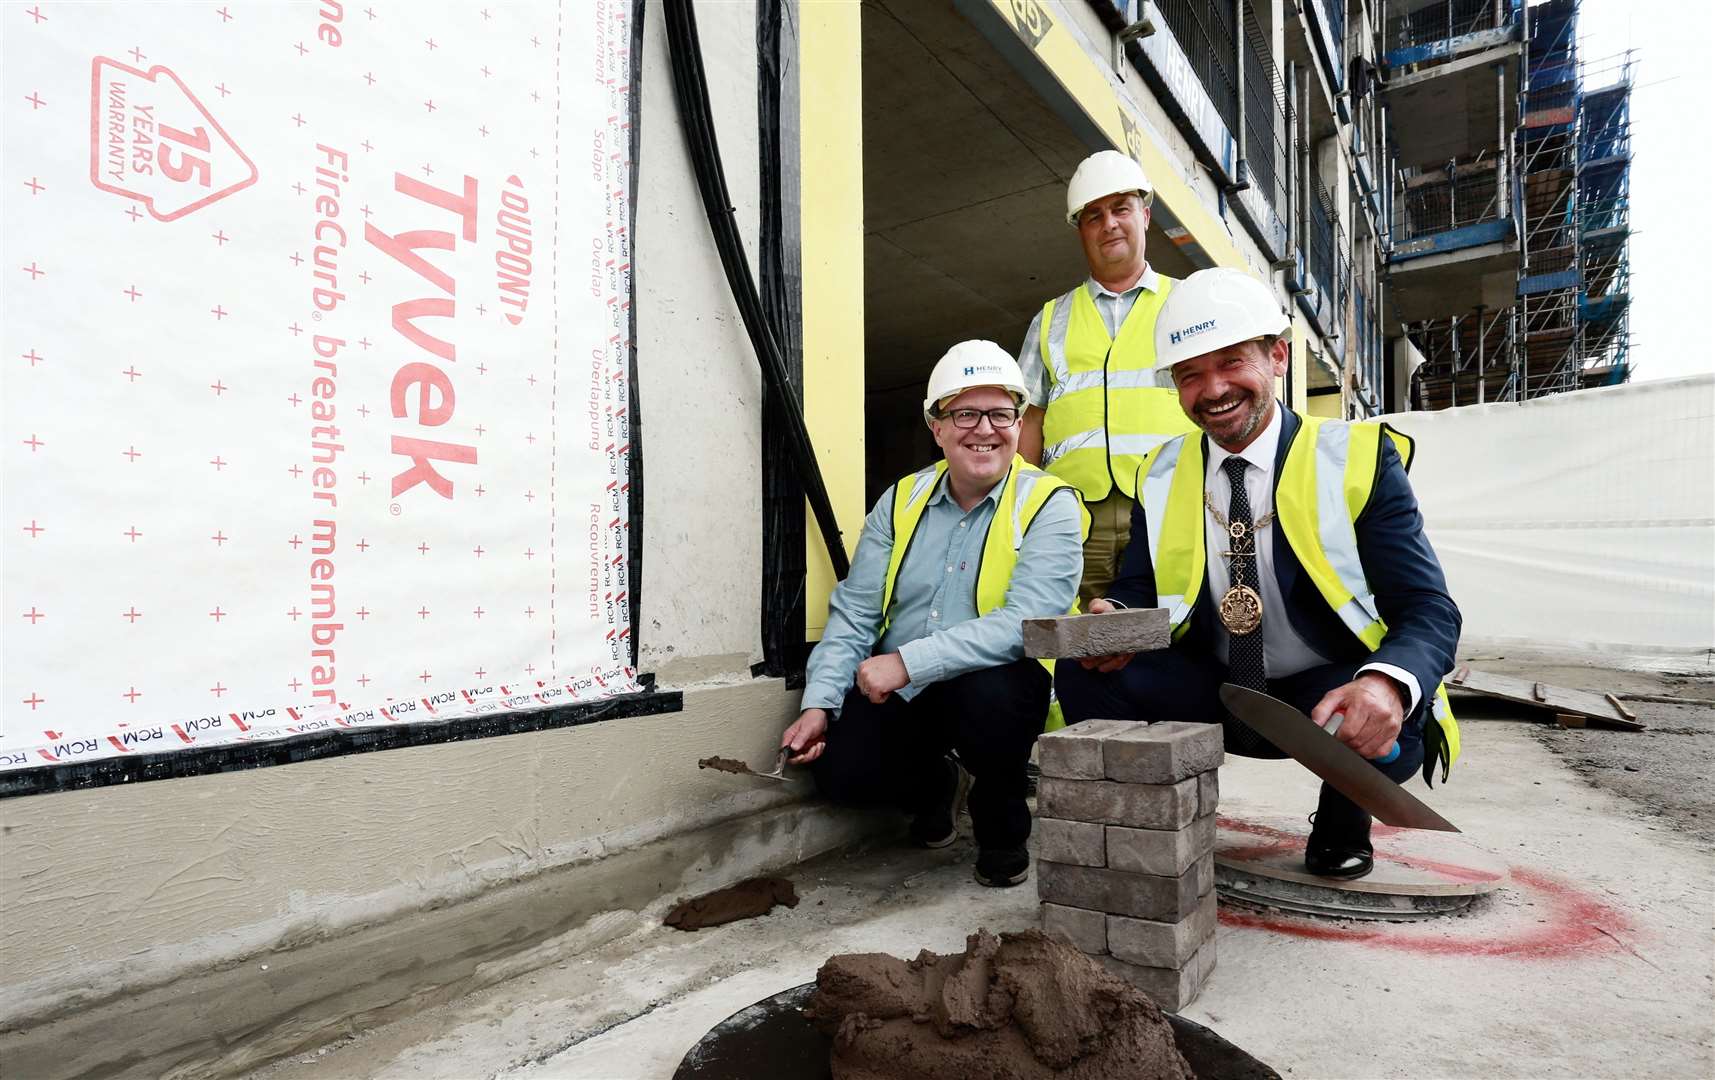 The Mayor of Gravesham Cllr Peter Scollard lays the first brick at The Charter, watched by Cllr John Burden, Leader of Gravesham council, and Cllr Lenny Rolles, chairman of Rosherville, the council’s commercial trading company. Picture: Gravesham Borough Council